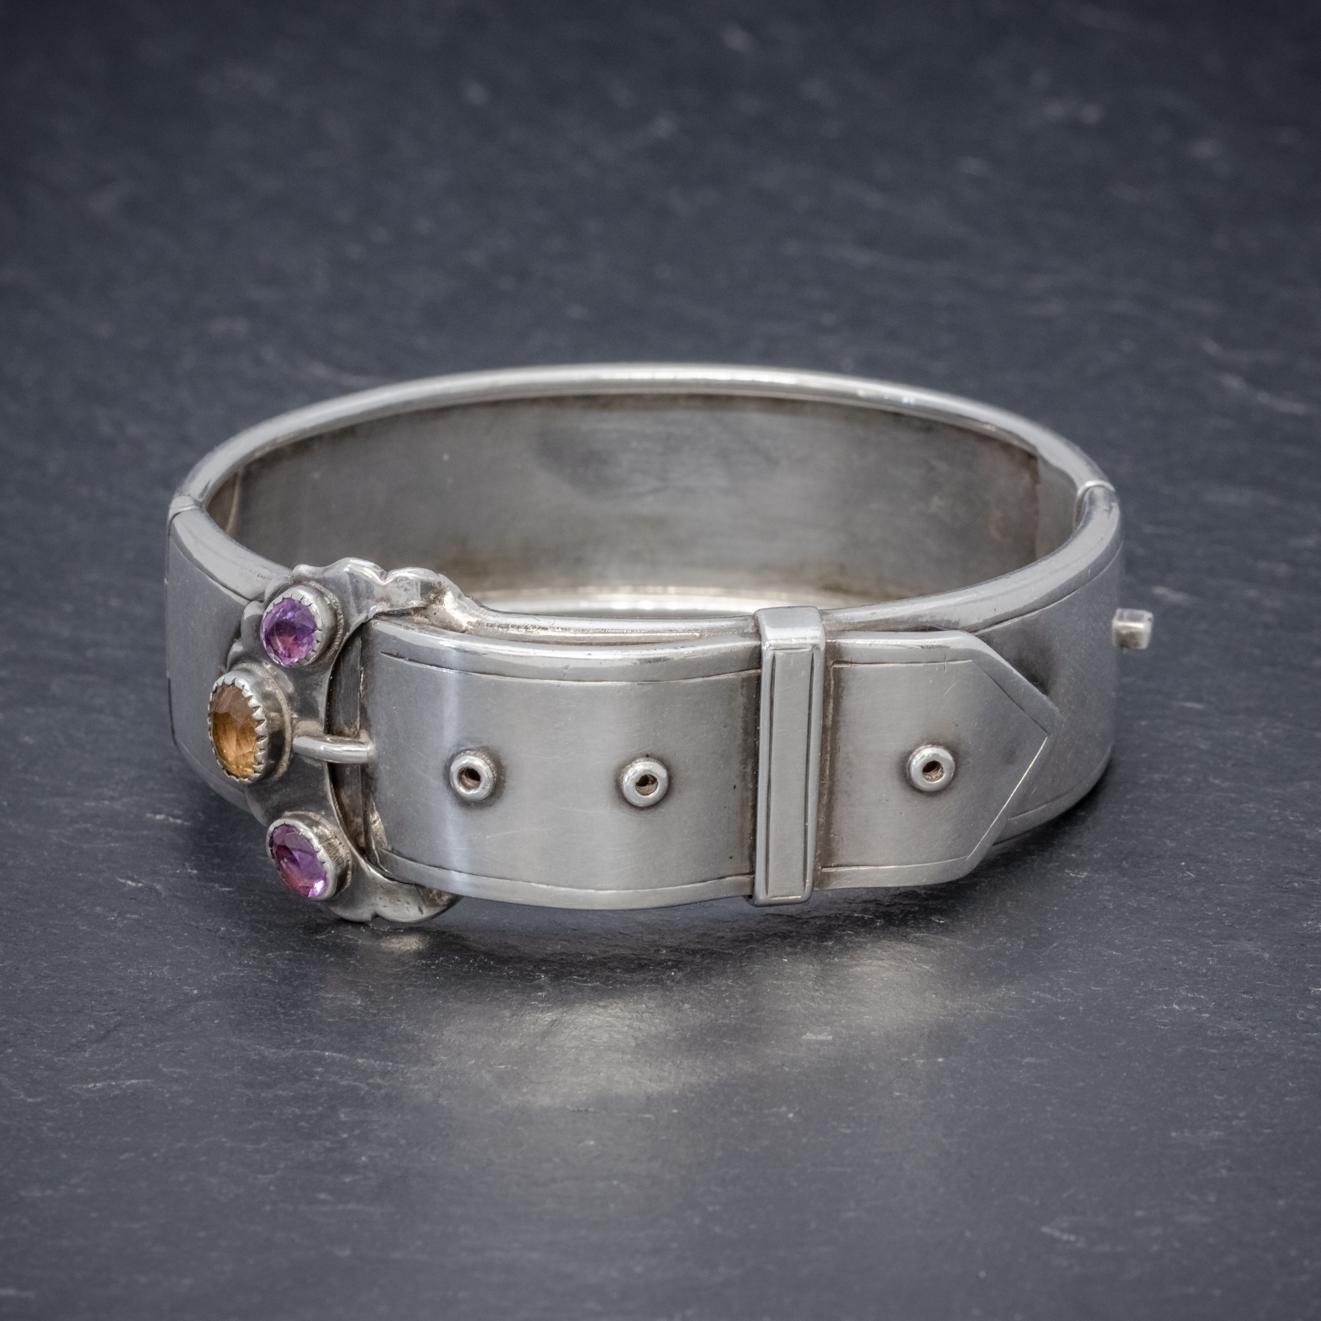 A wonderful antique Victorian Scottish cuff bangle shaped like a large belt with a Citrine and two Amethysts set on top of the buckle.  

The piece is fashioned in Sterling Silver and is solid and substantial. It is a beautiful design and has